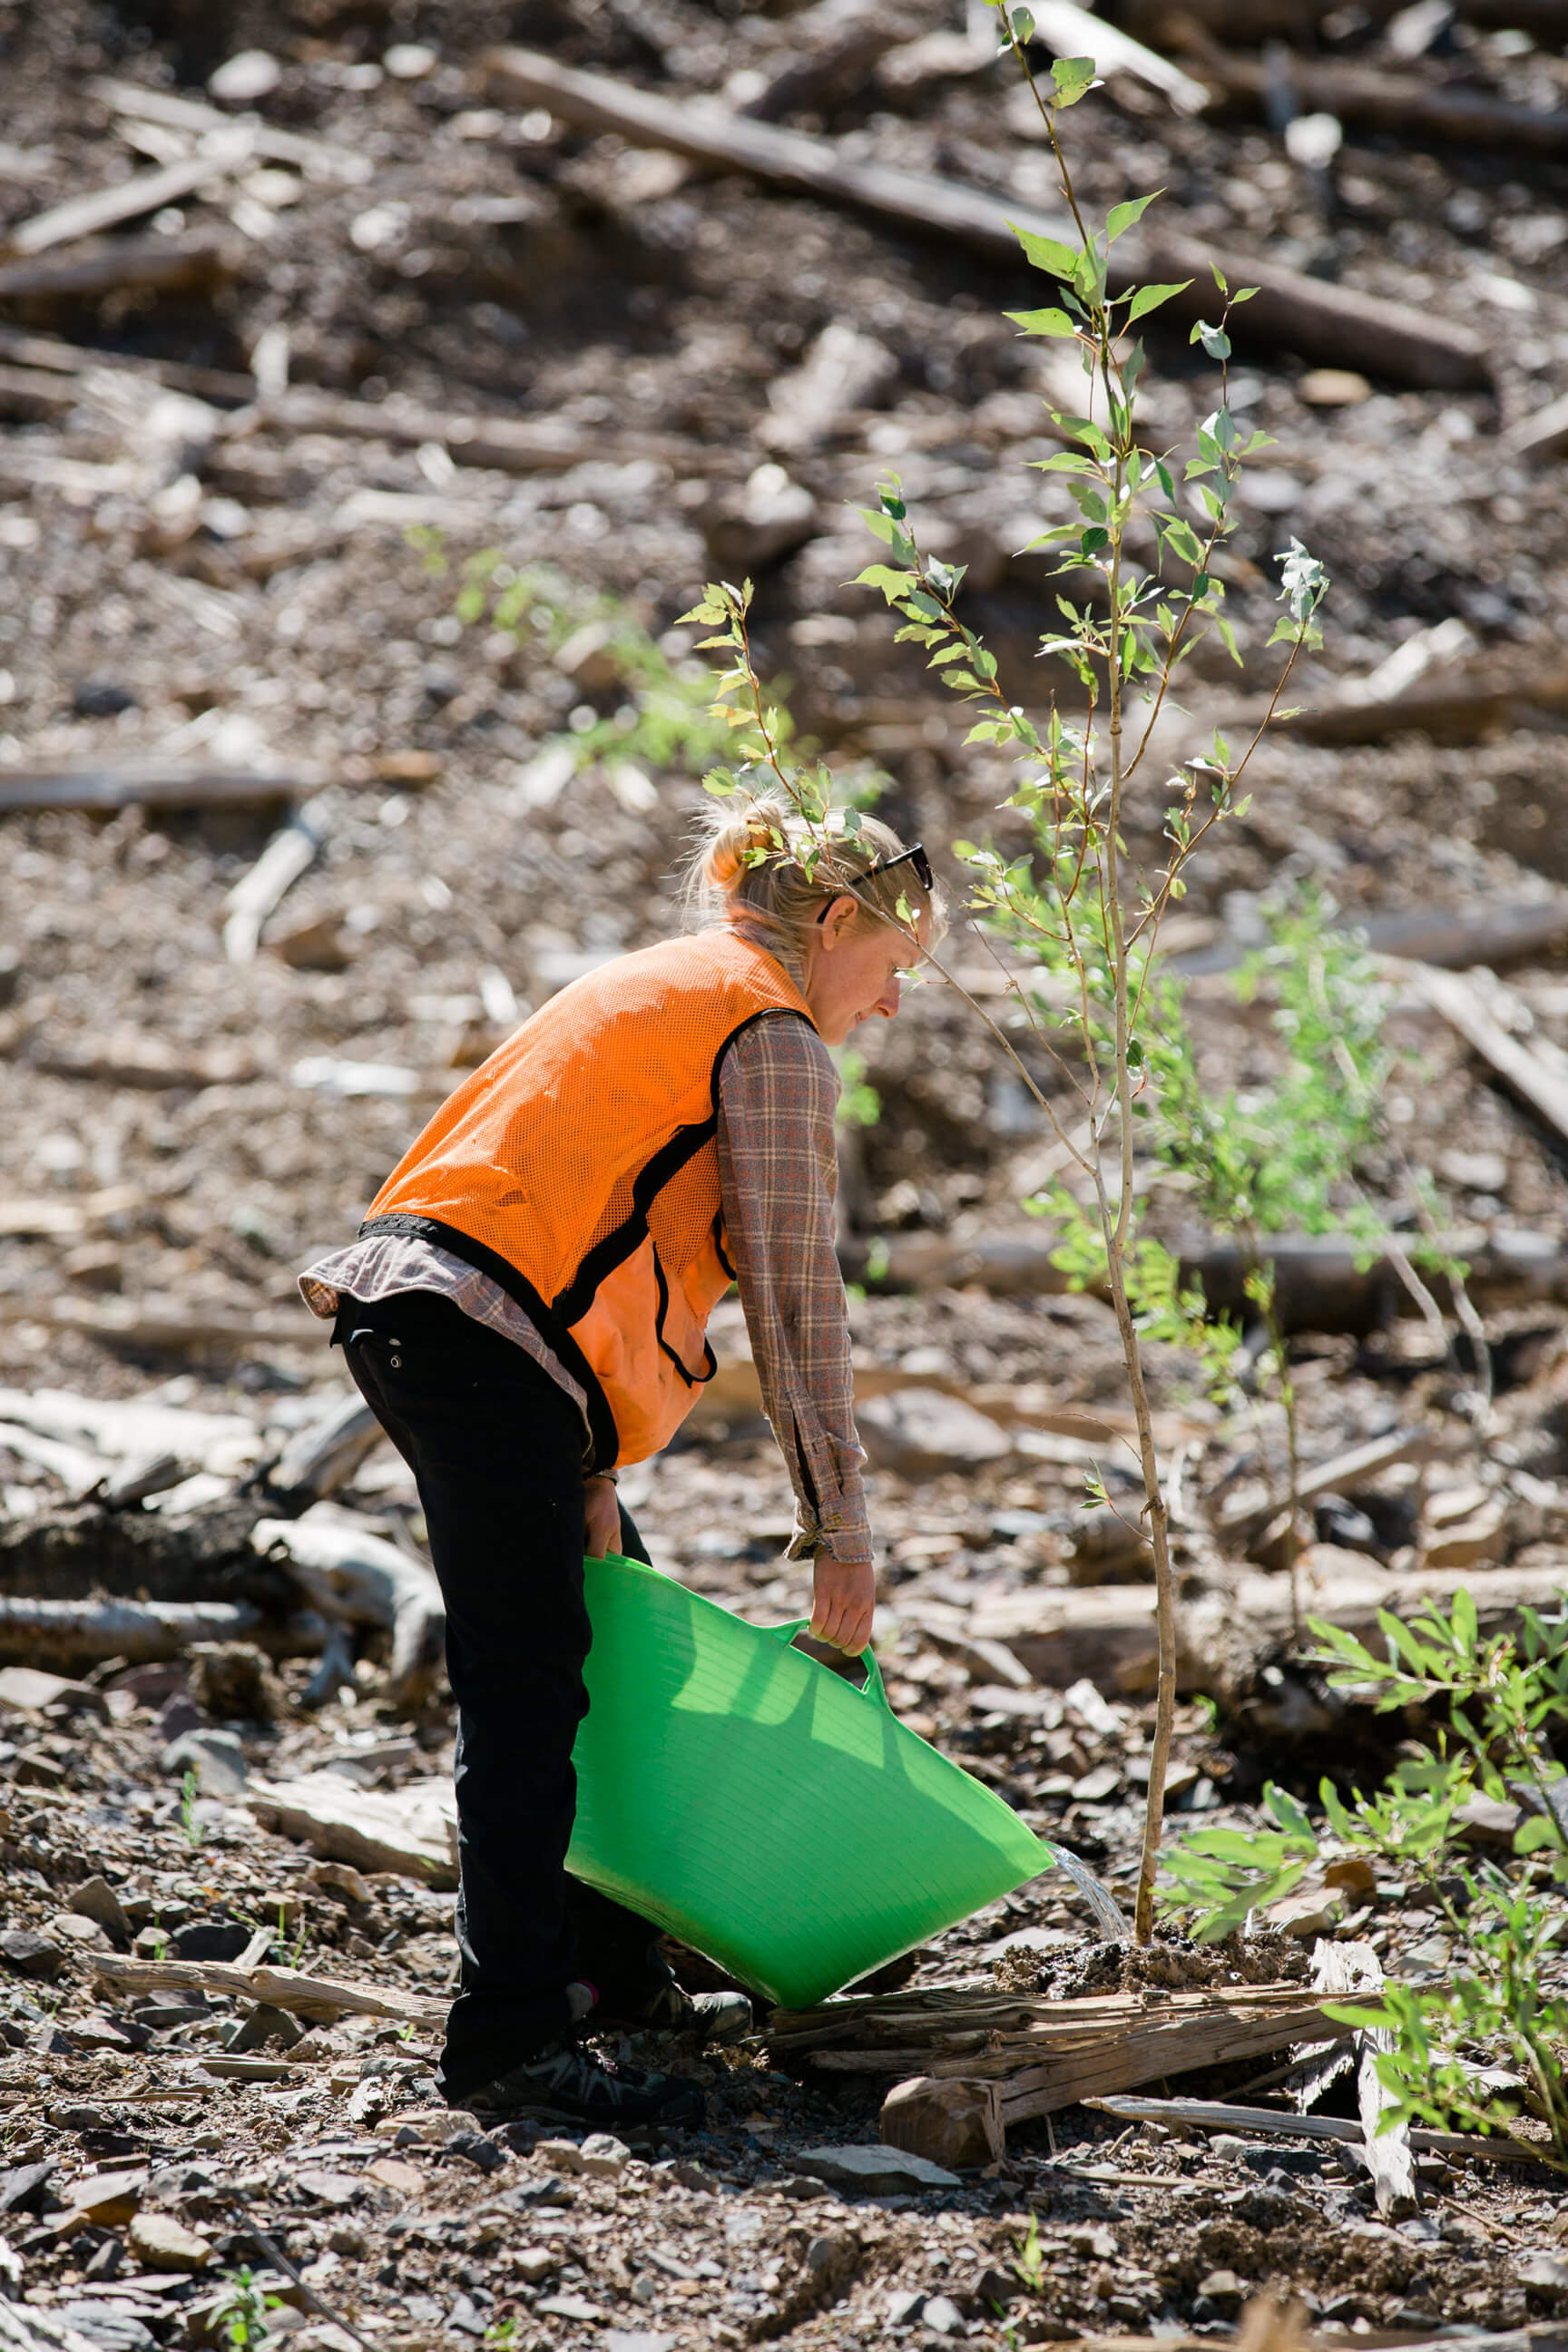 A woman worker waters a newly planted tree sapling at the former Mike Horse mine in Montana